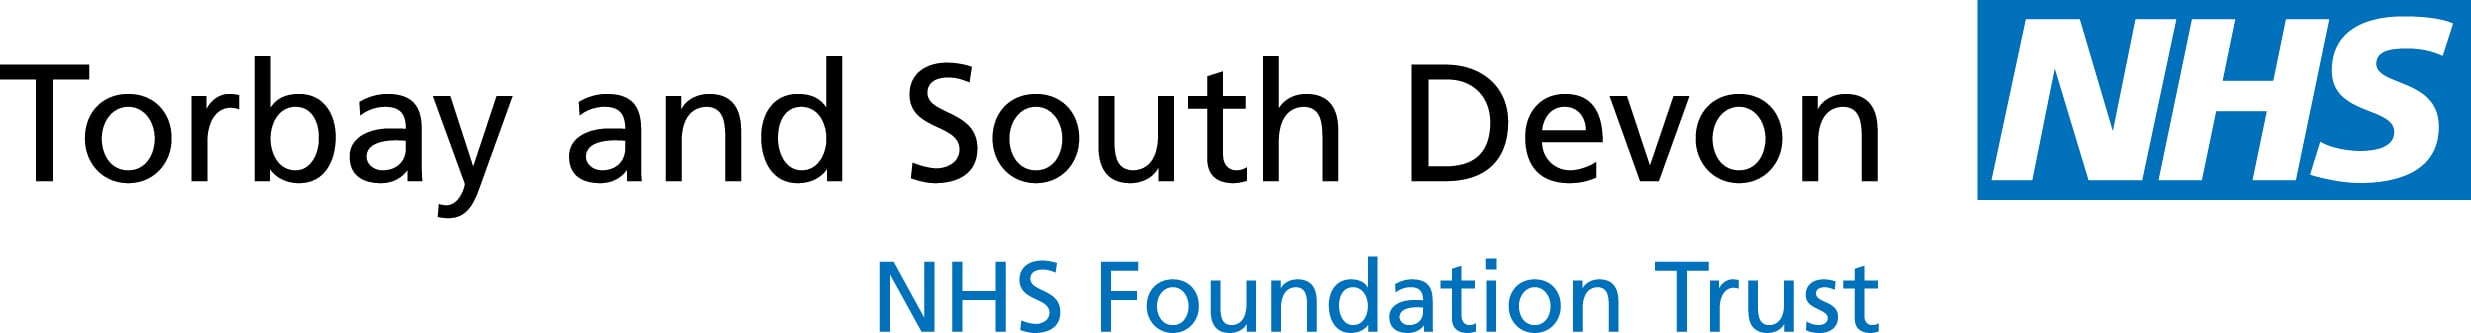 Torbay and South Devon NHS Foundation Trust COL